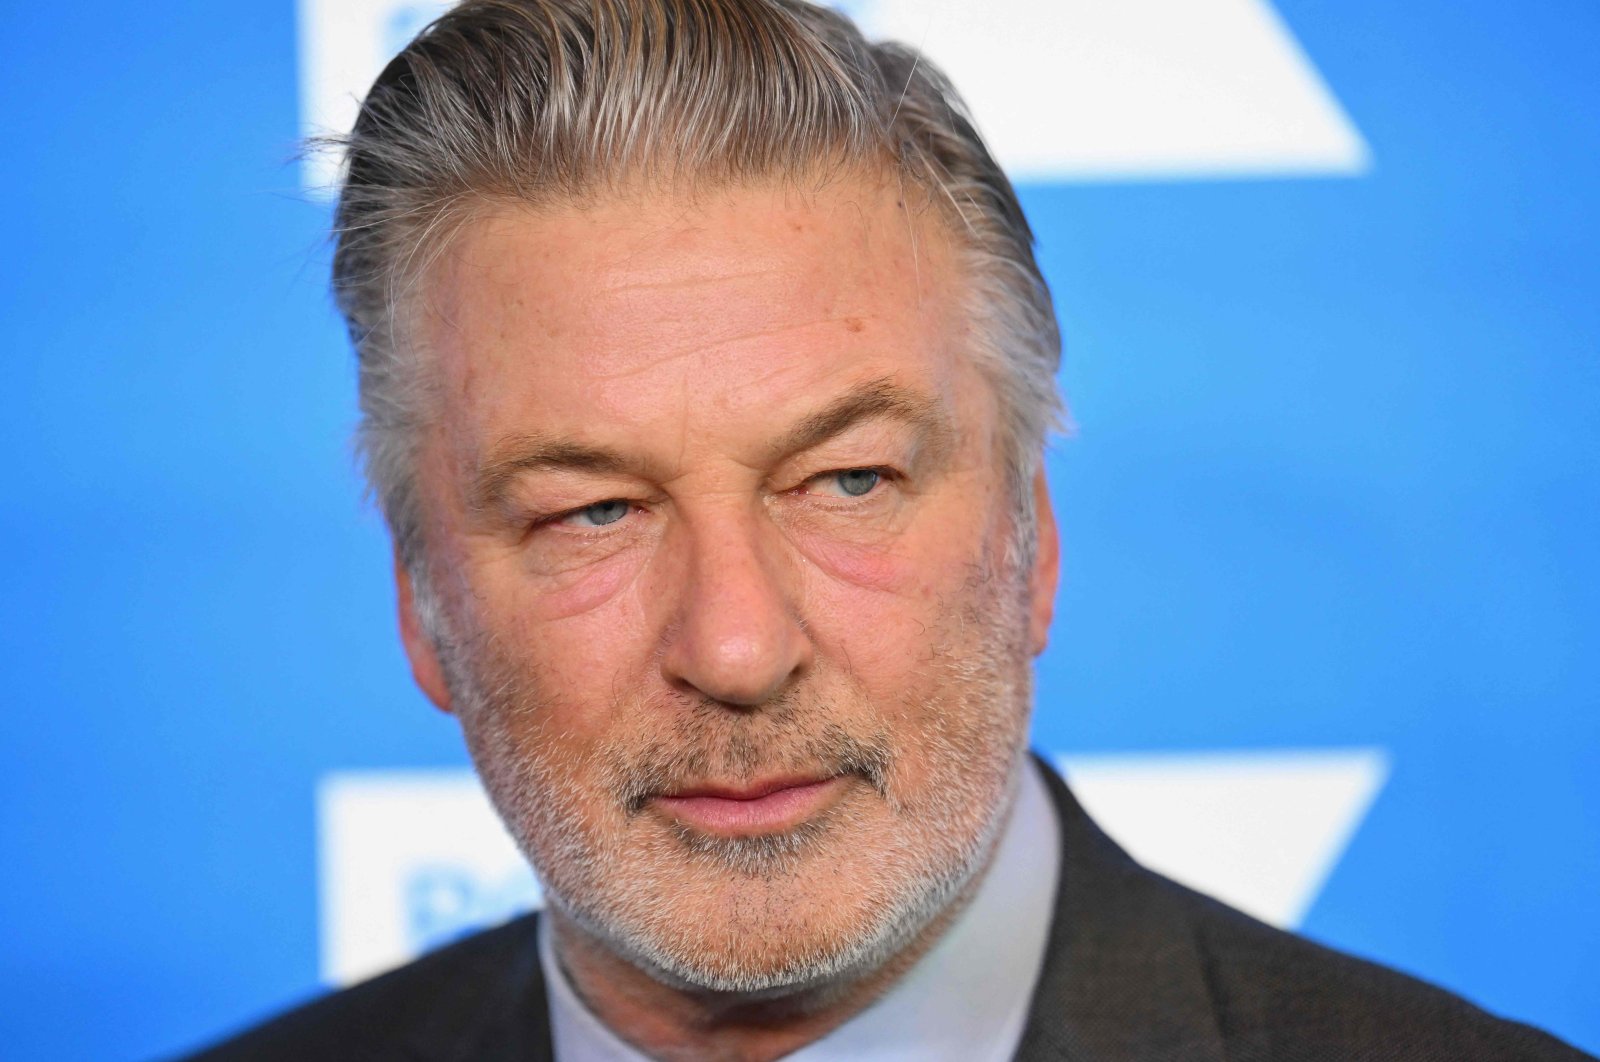 Actor Alec Baldwin arrives for the 2022 Robert F. Kennedy Human Rights Ripple of Hope Award Gala in New York, U.S., Dec. 6, 2022. (AFP Photo)